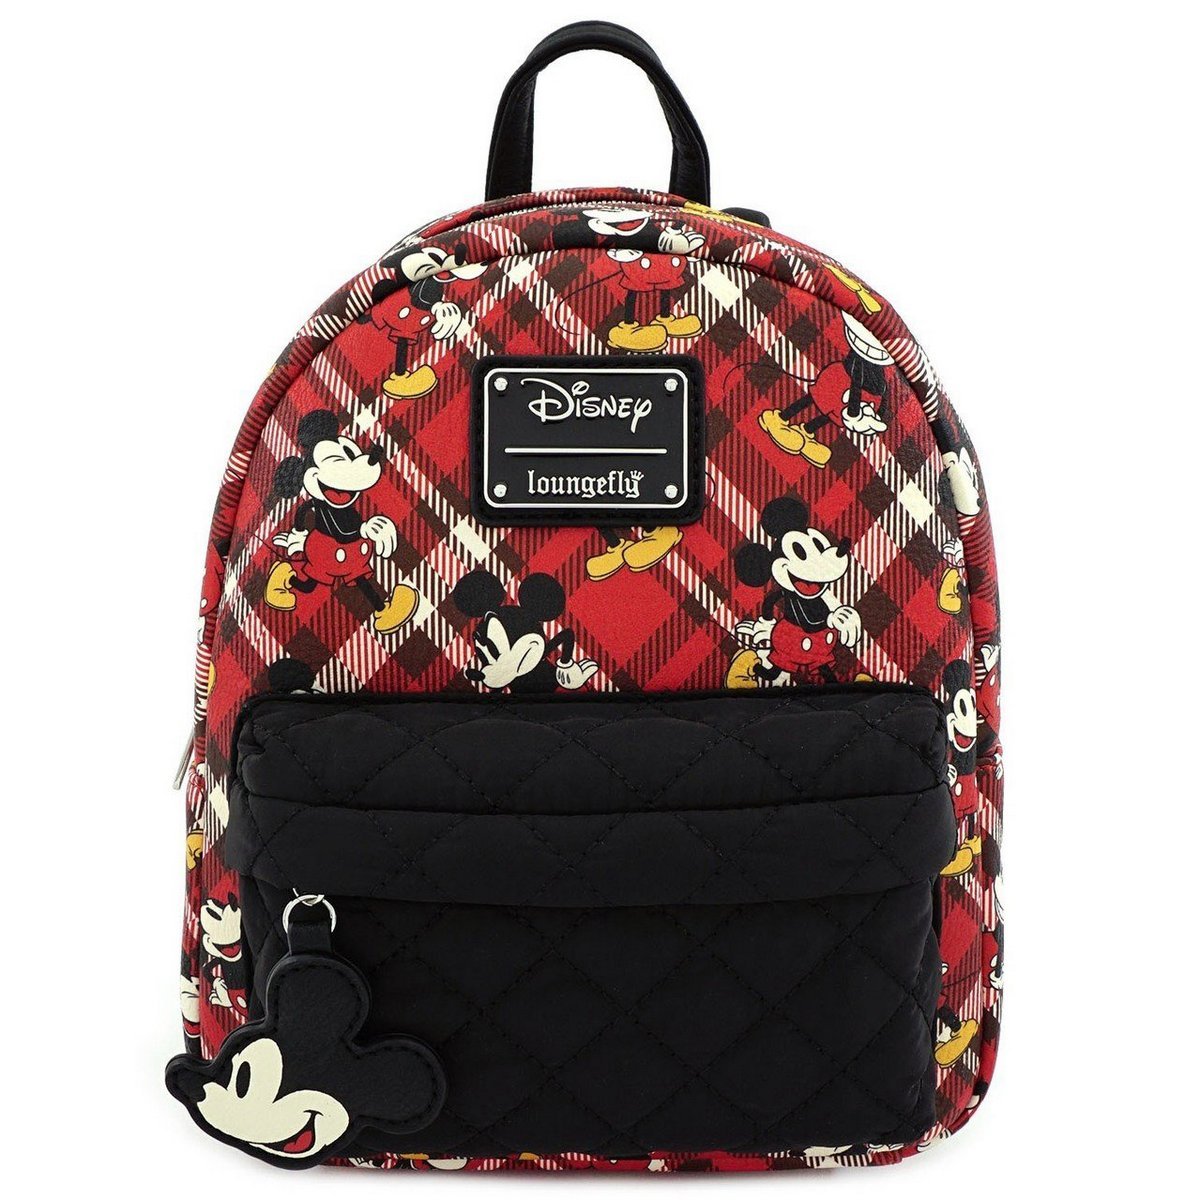 Mickey Mouse Red Plaid